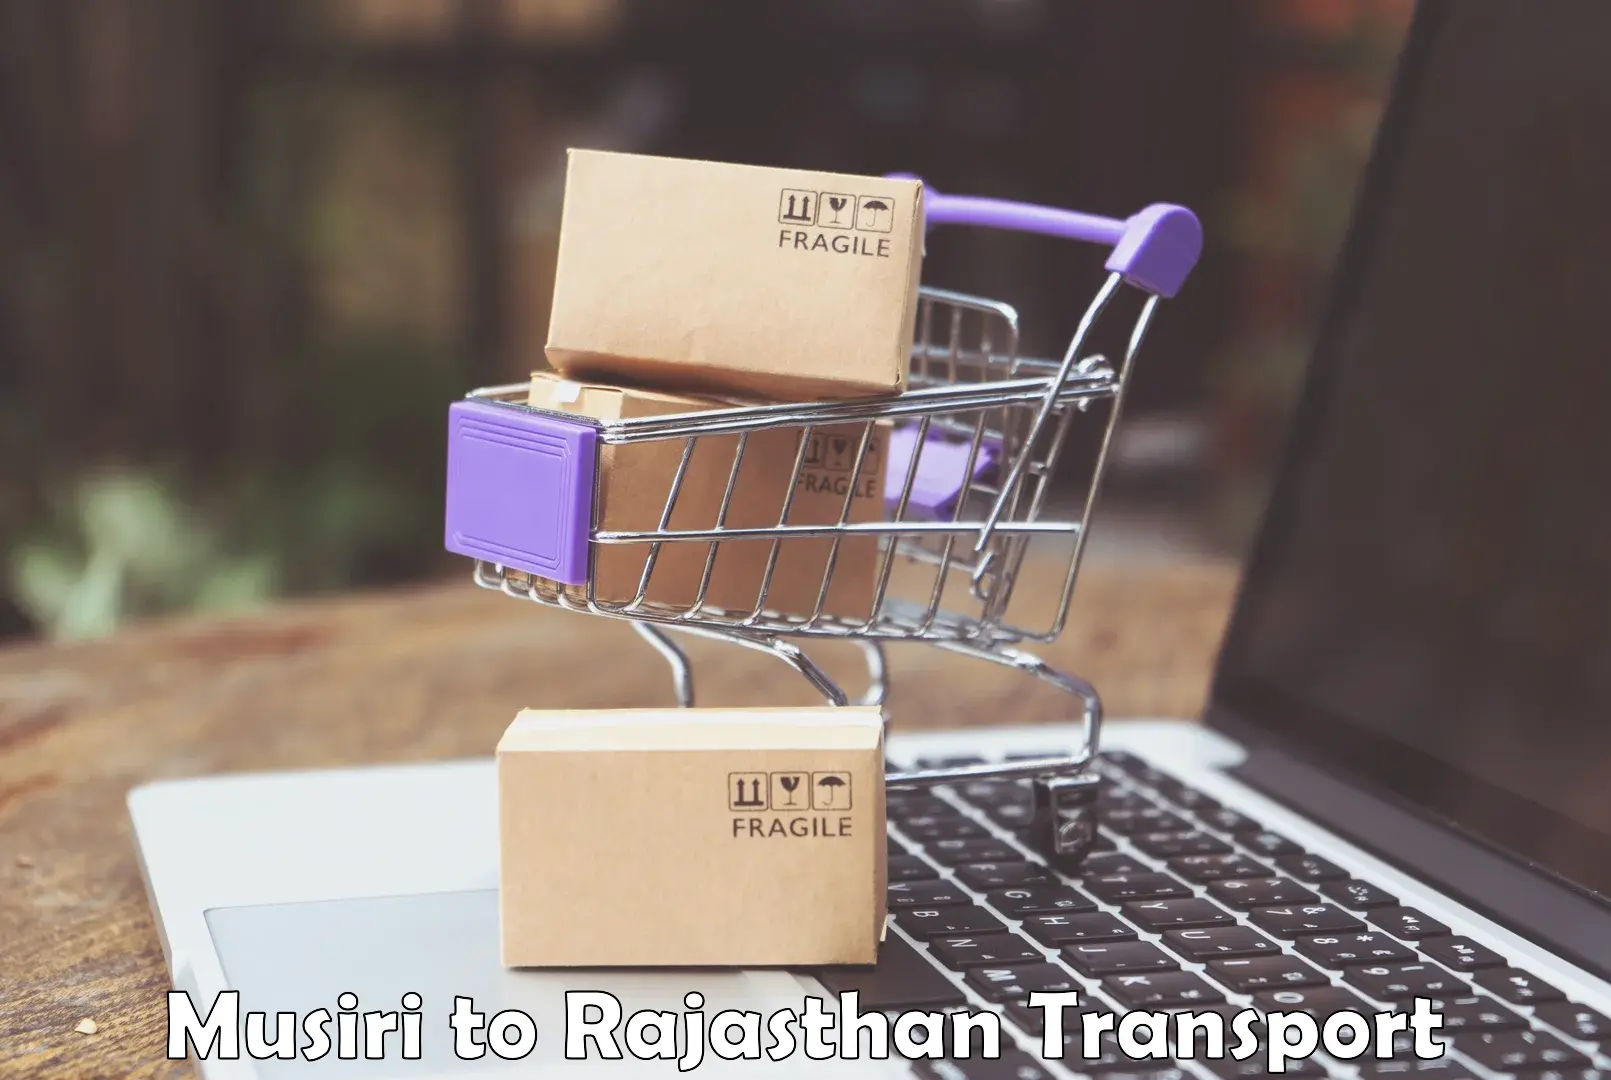 Express transport services in Musiri to Jaipur